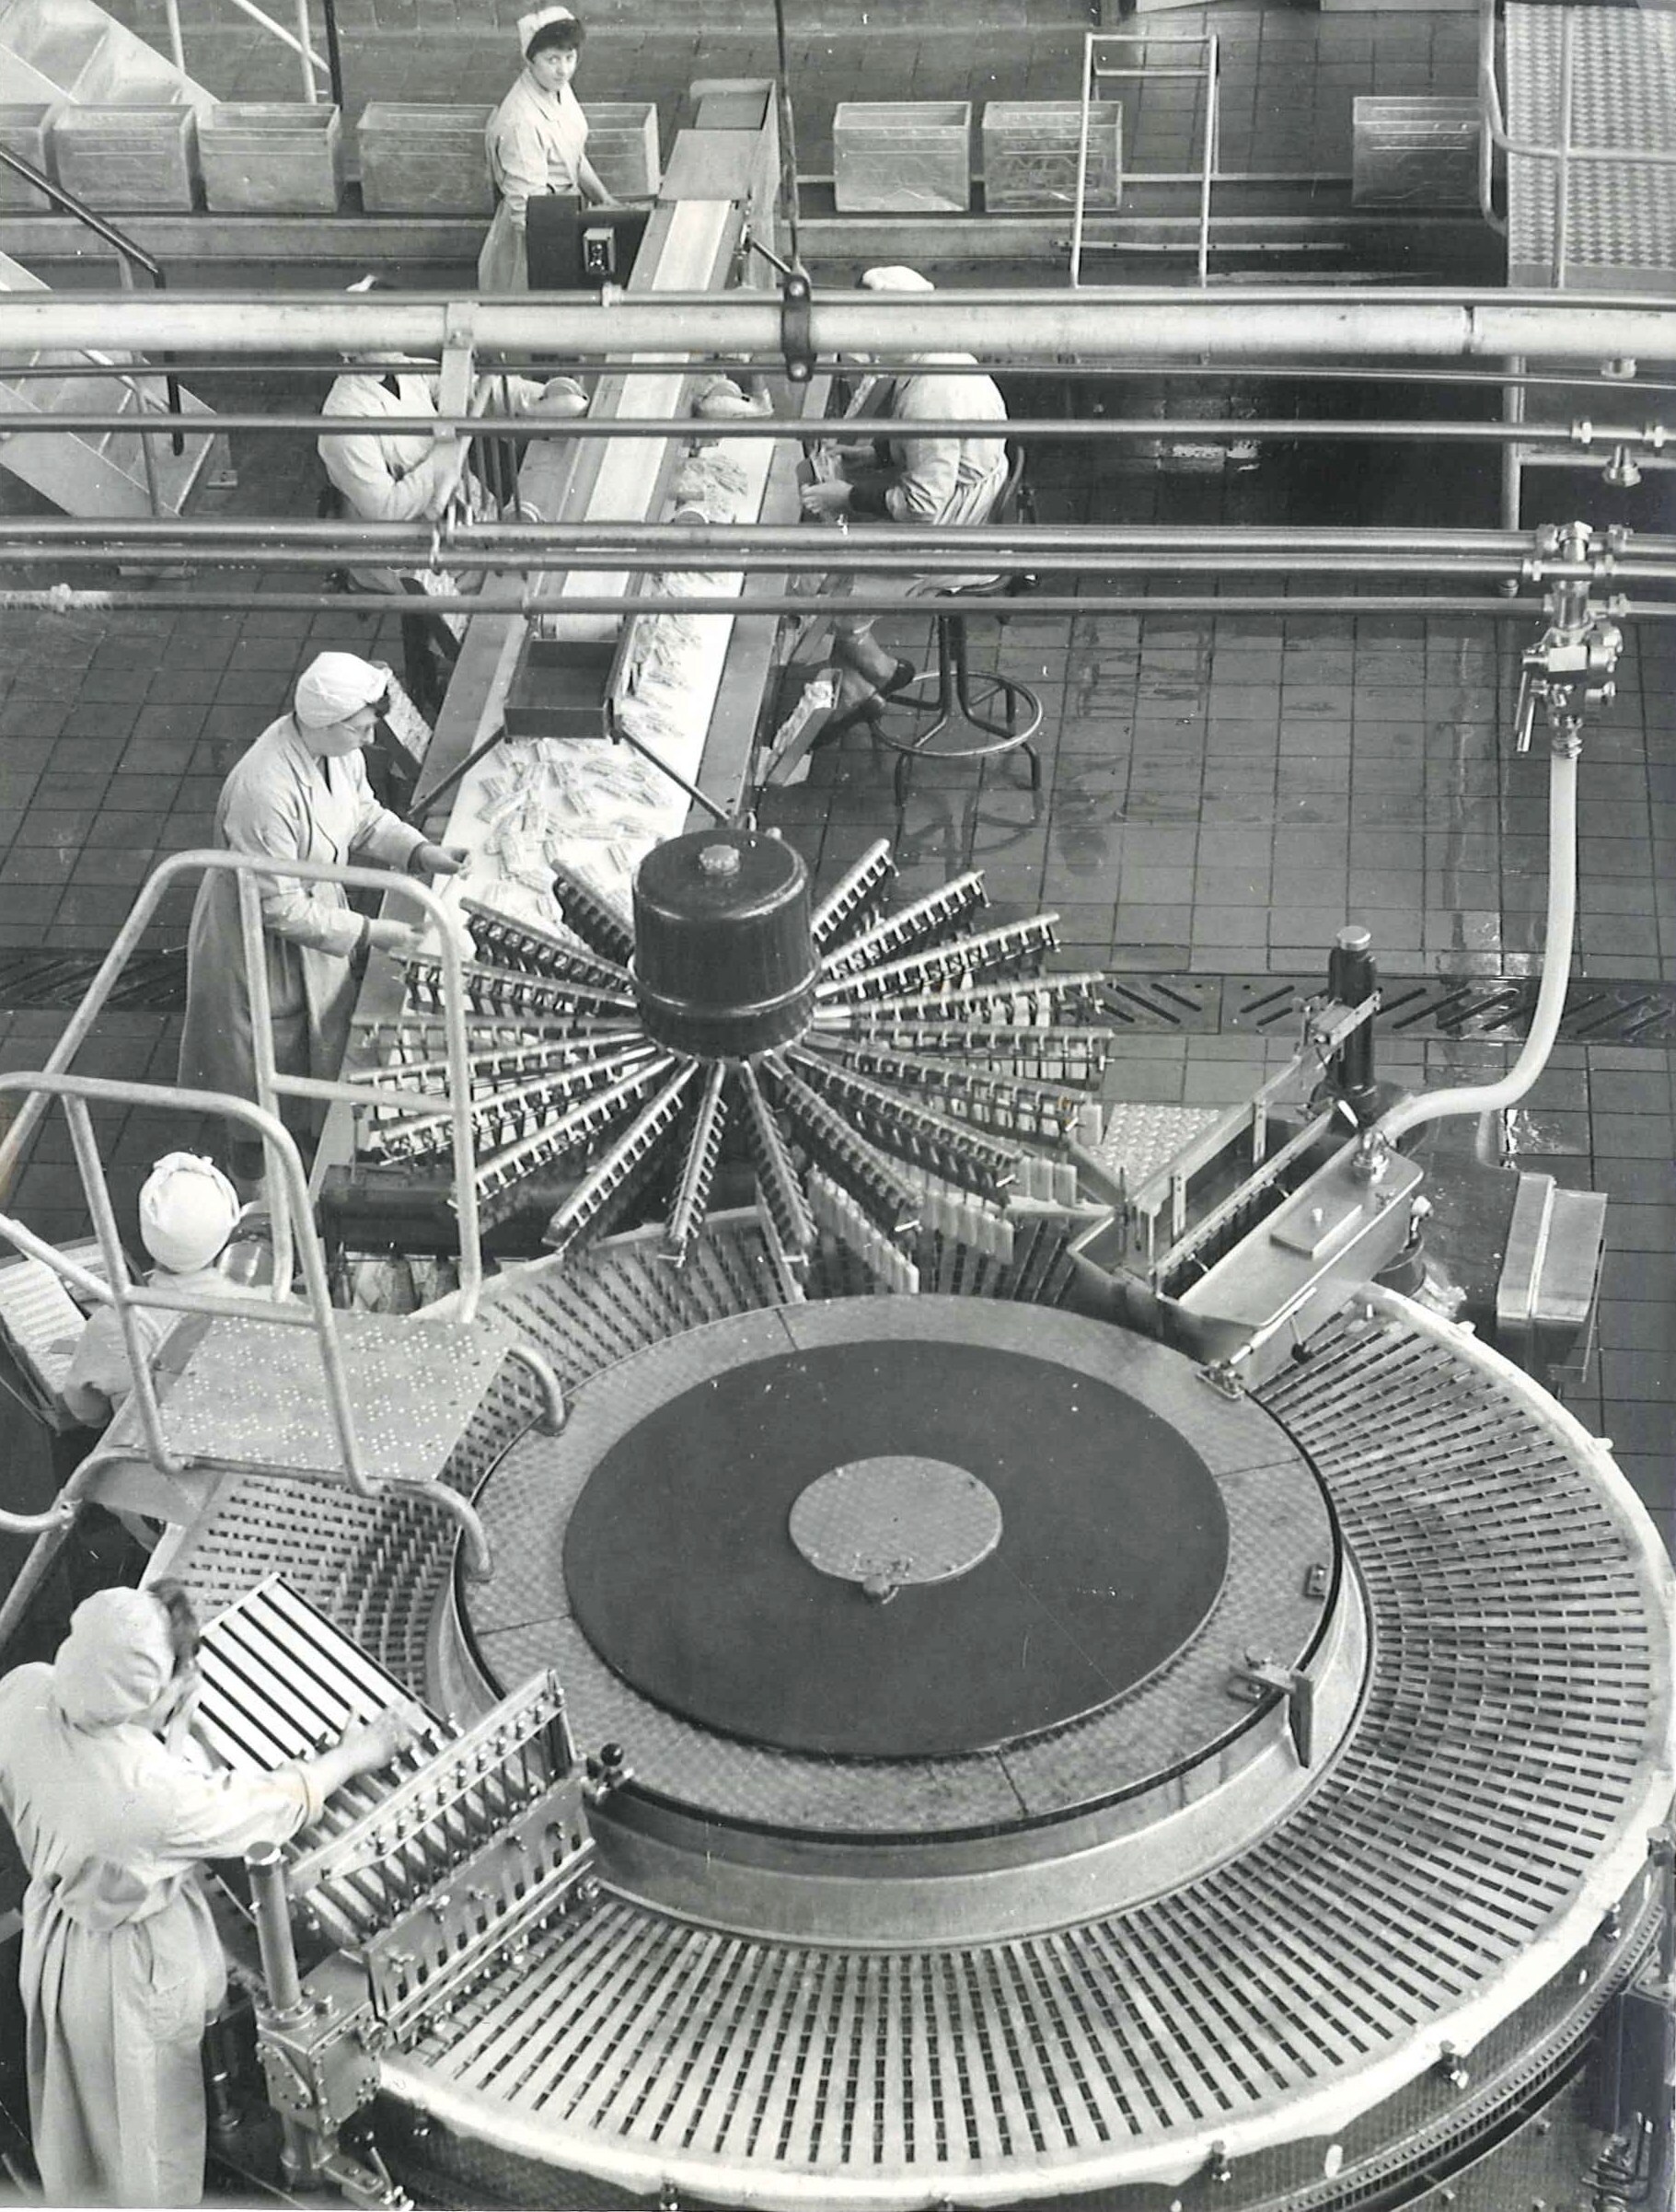 Old black & White image of an Ice Cream Factory machine